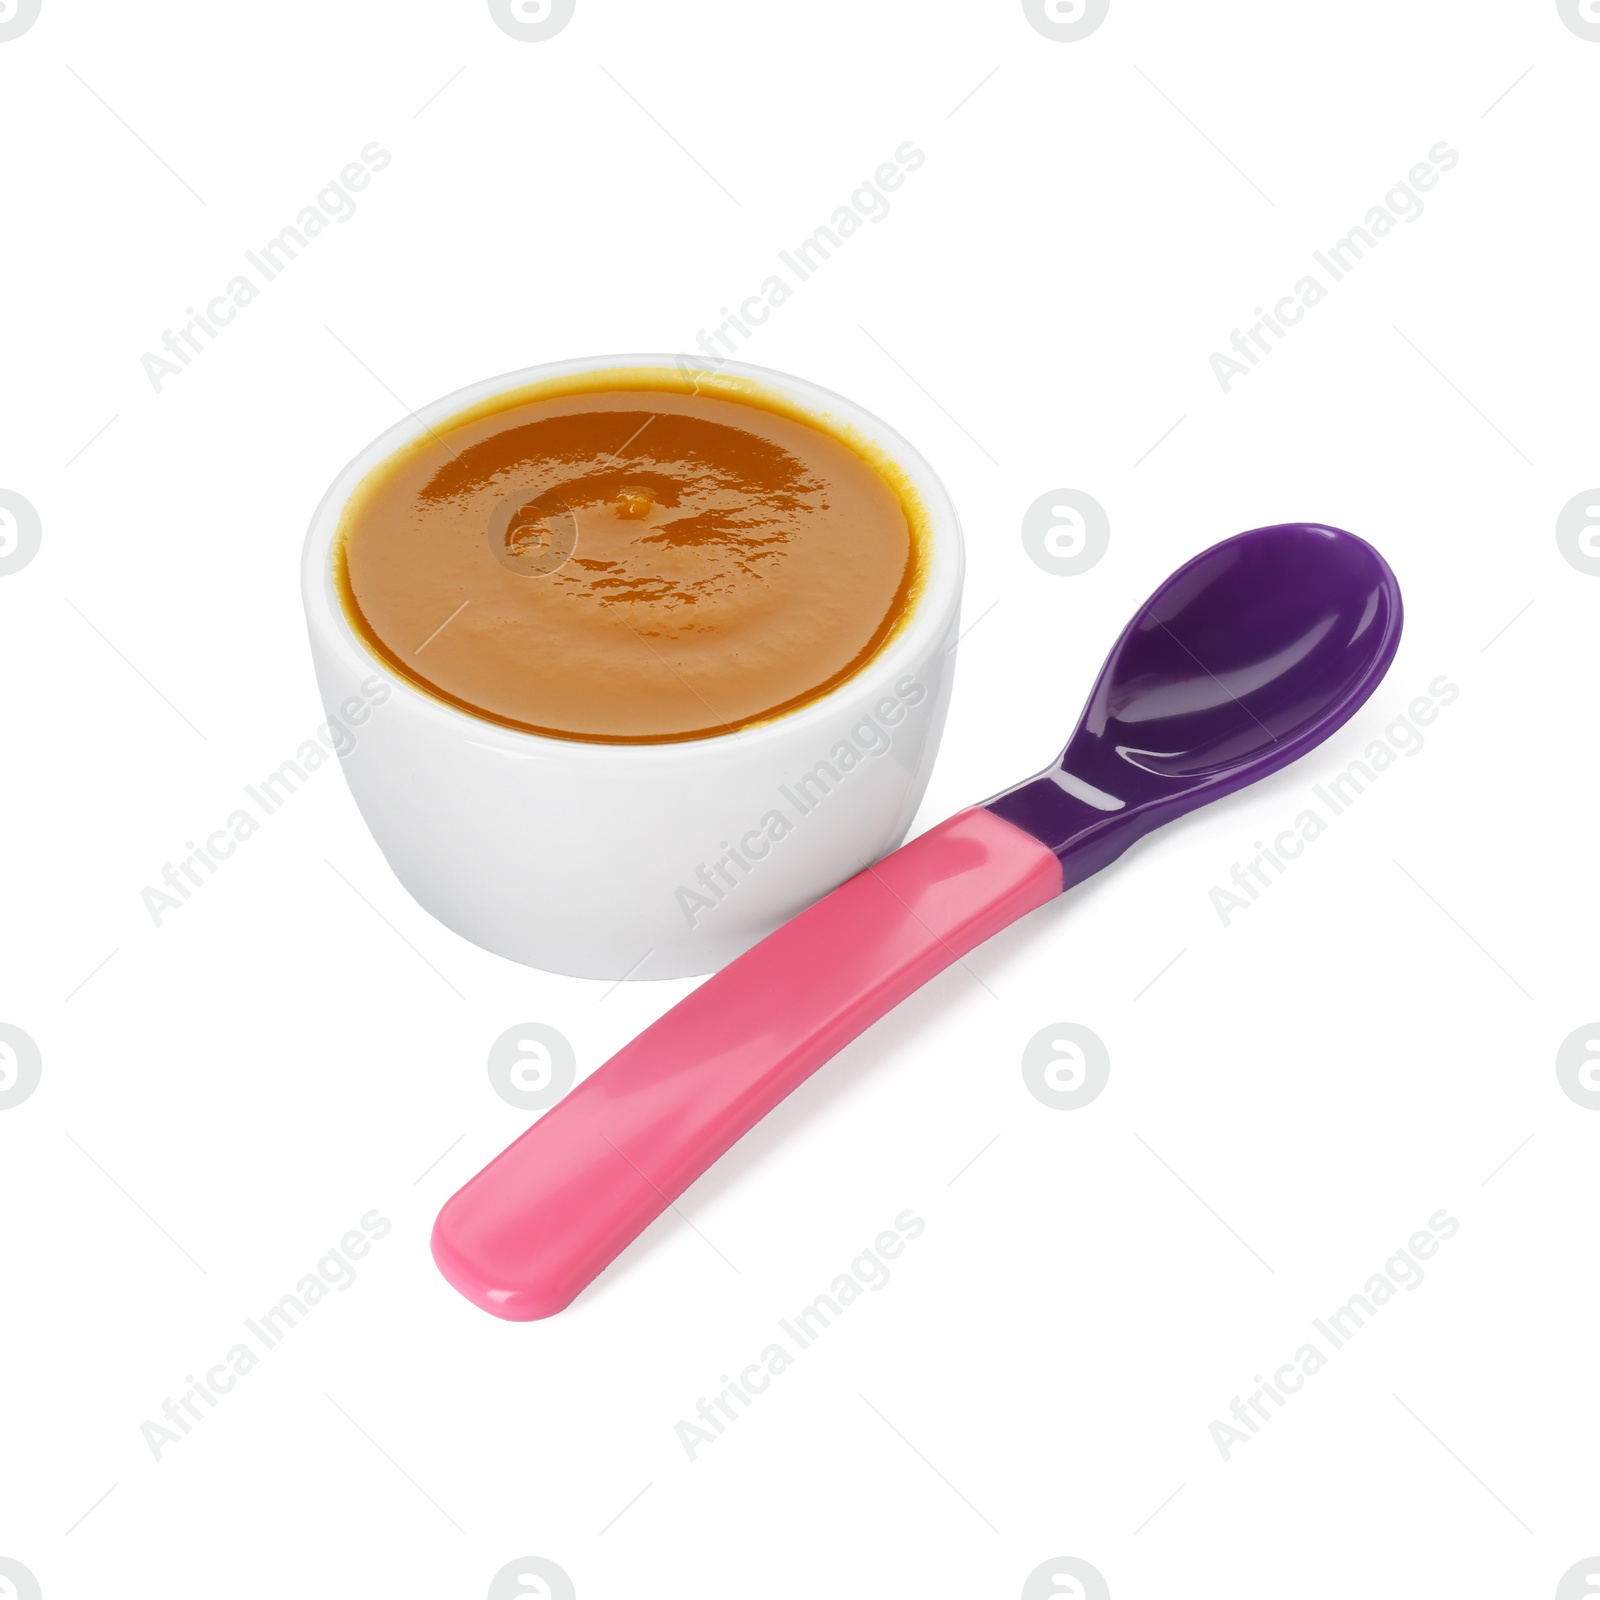 Photo of Bowl with healthy baby food and spoon isolated on white